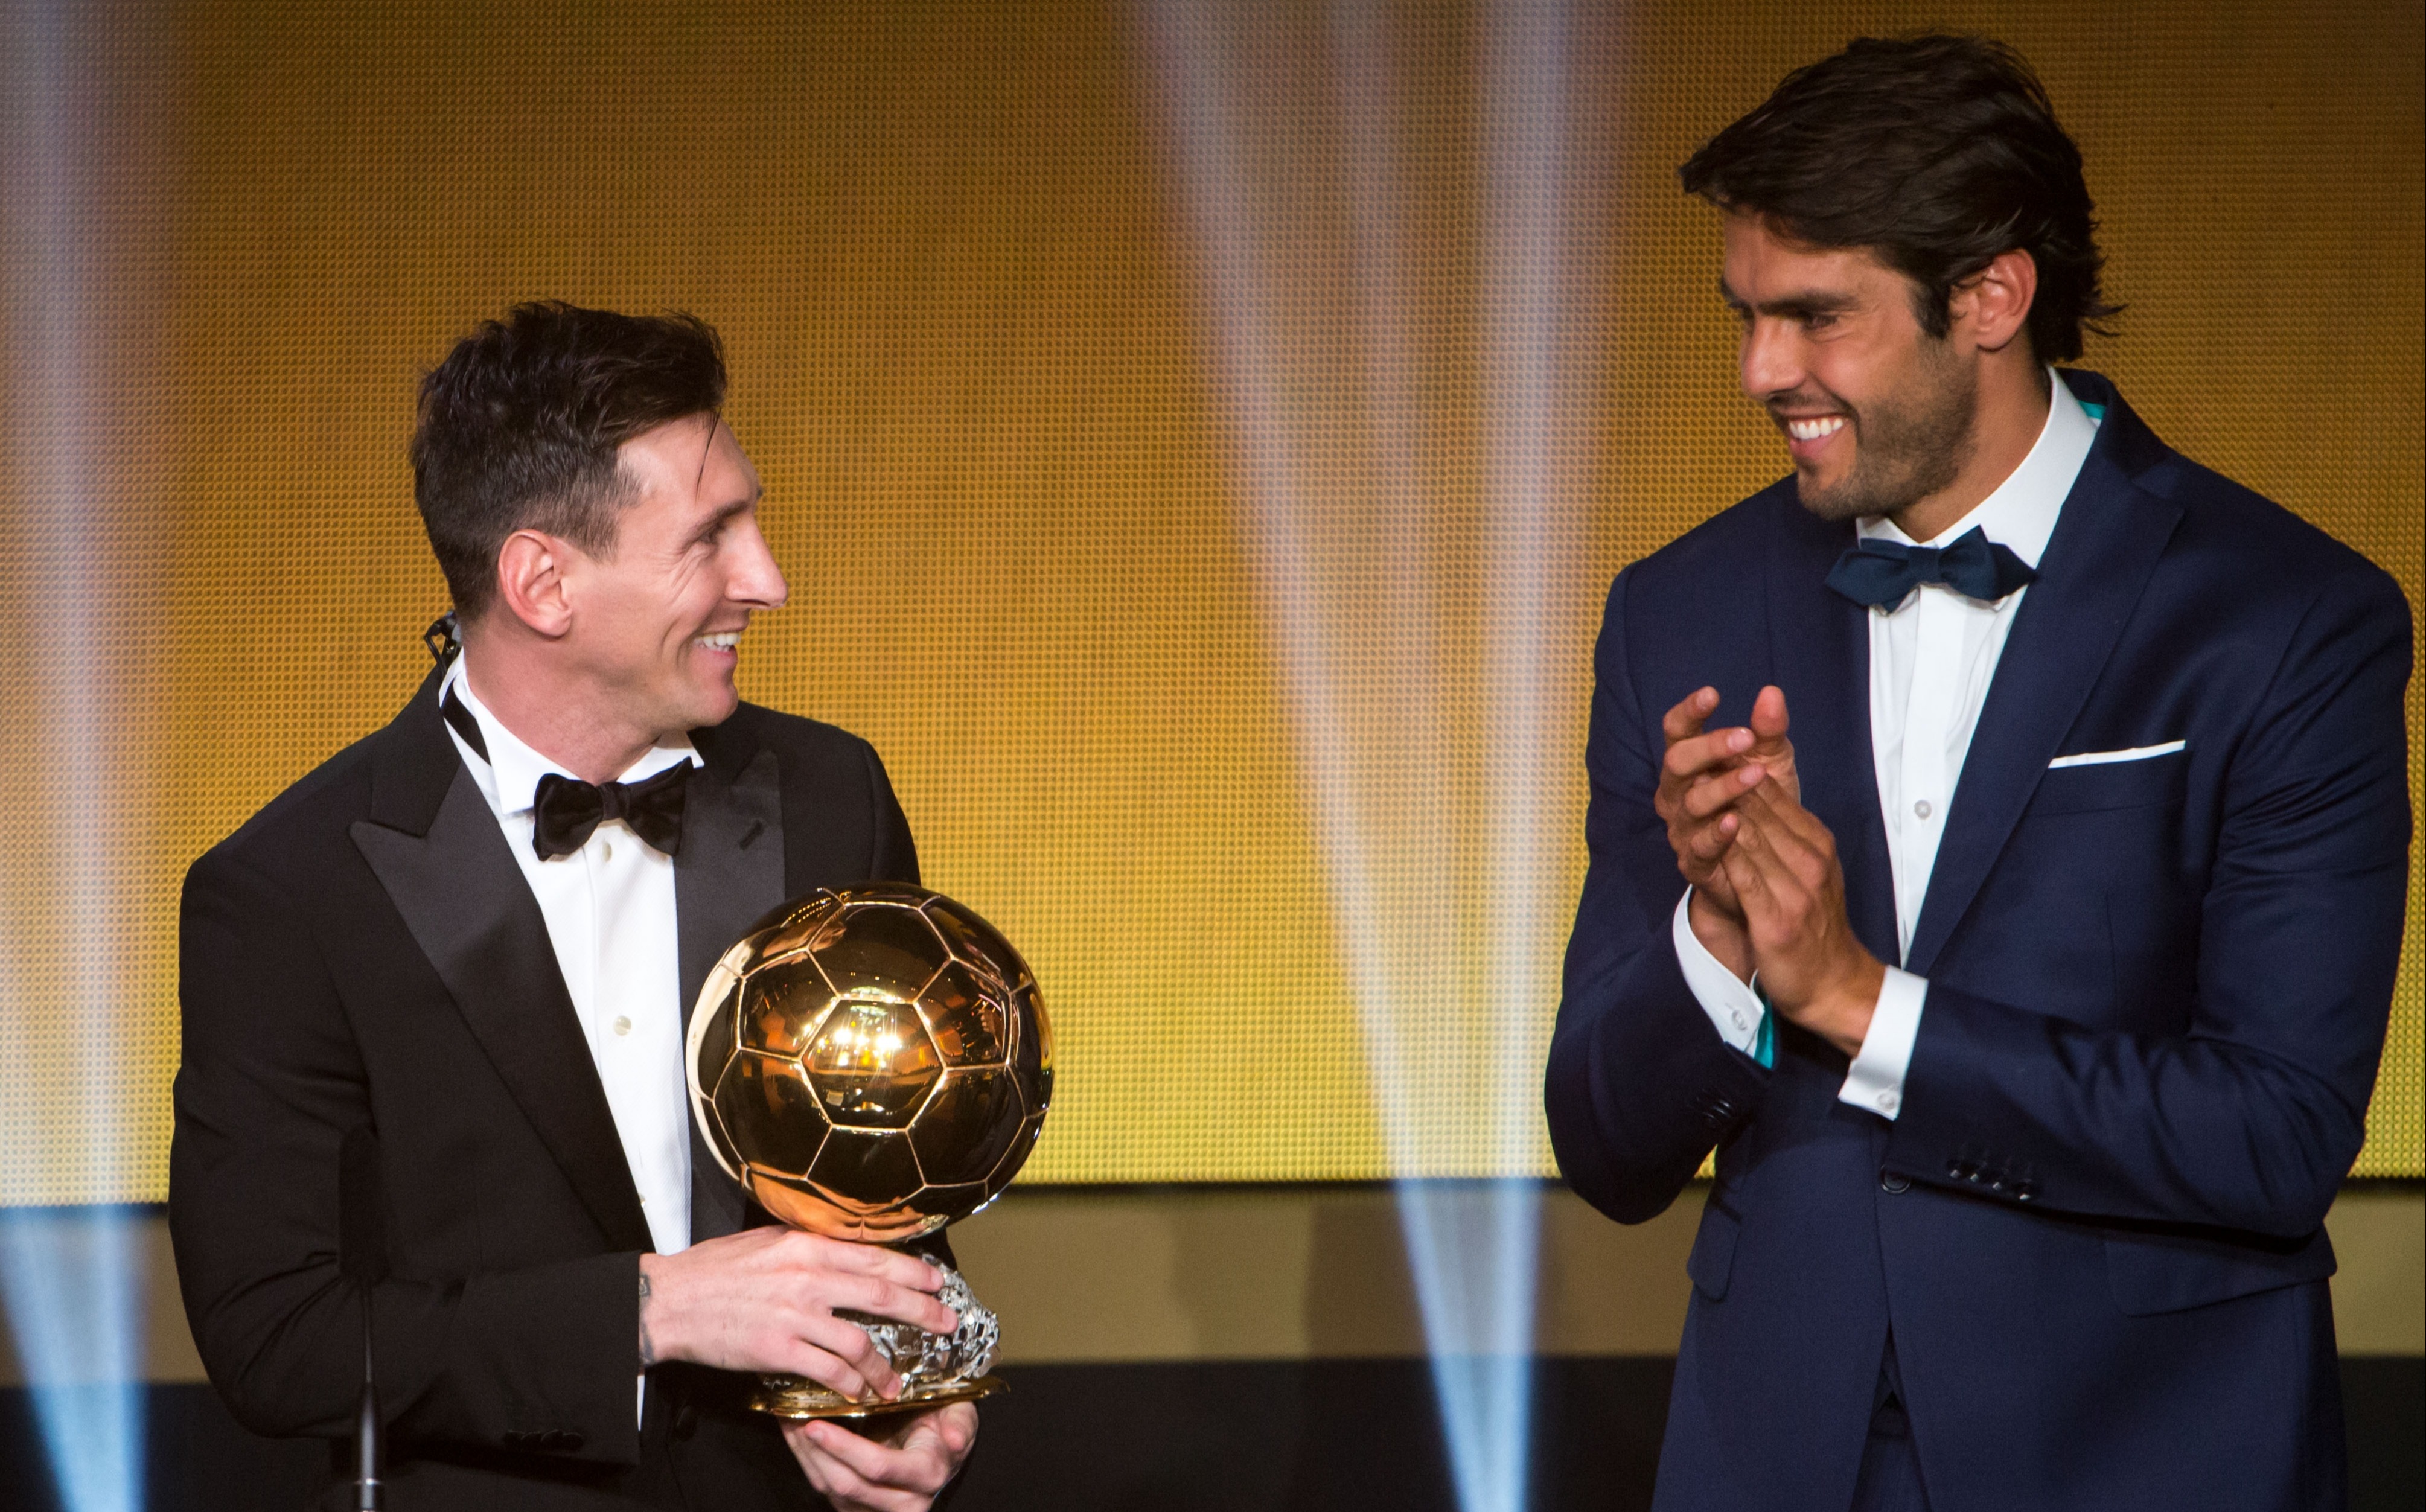 Along with Erling Haaland, Lionel Messi has been tipped to win this year's Ballon d'Or